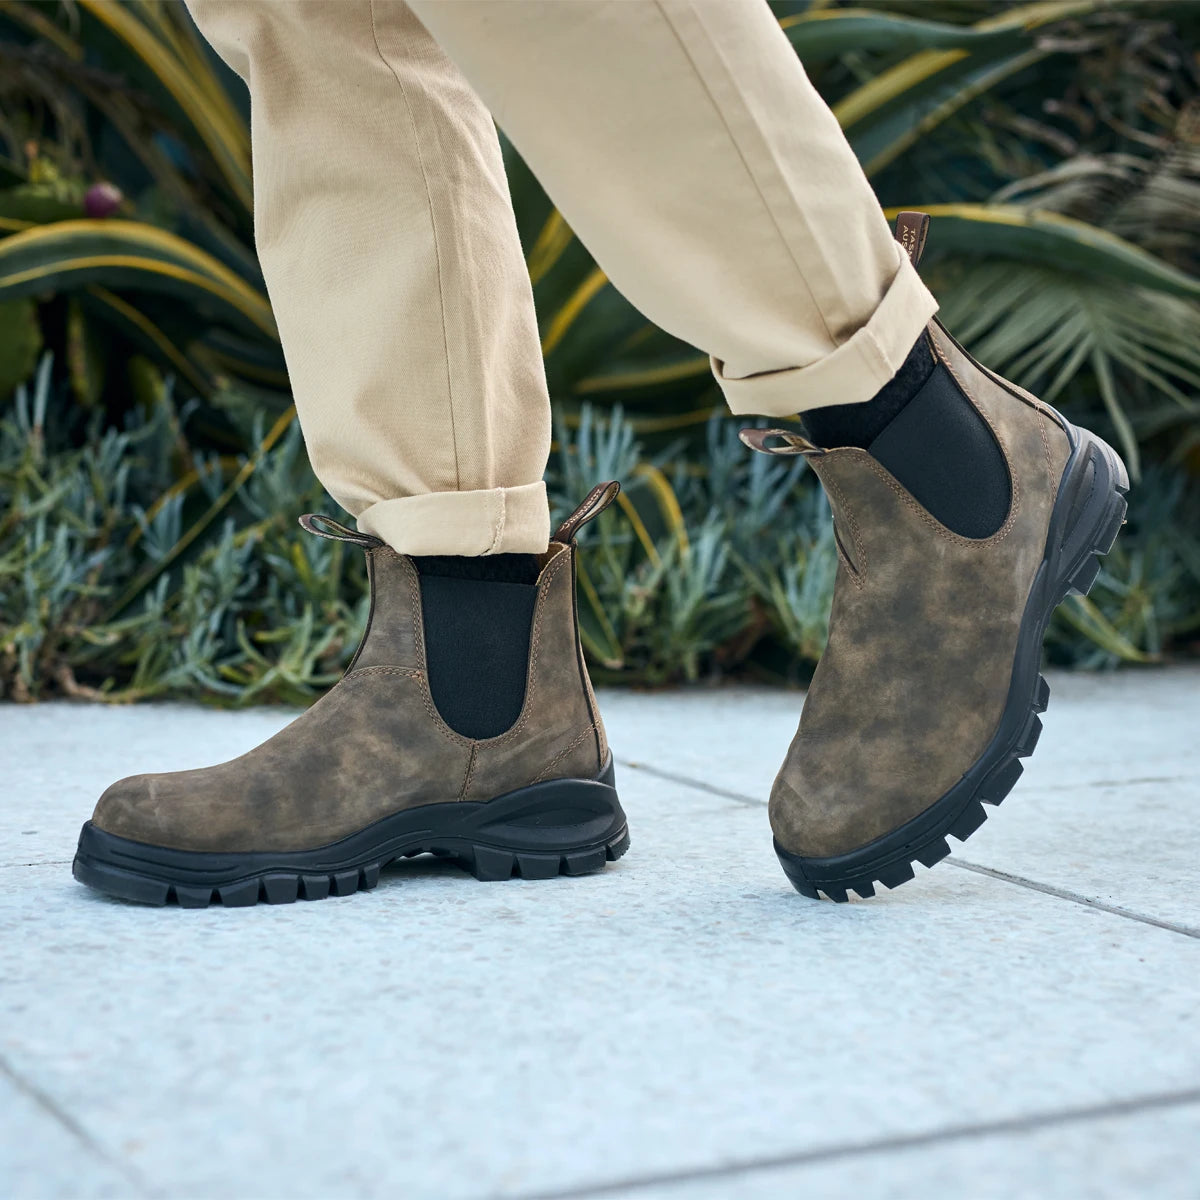 Where Can I Buy Blundstone Boots in Nyc?